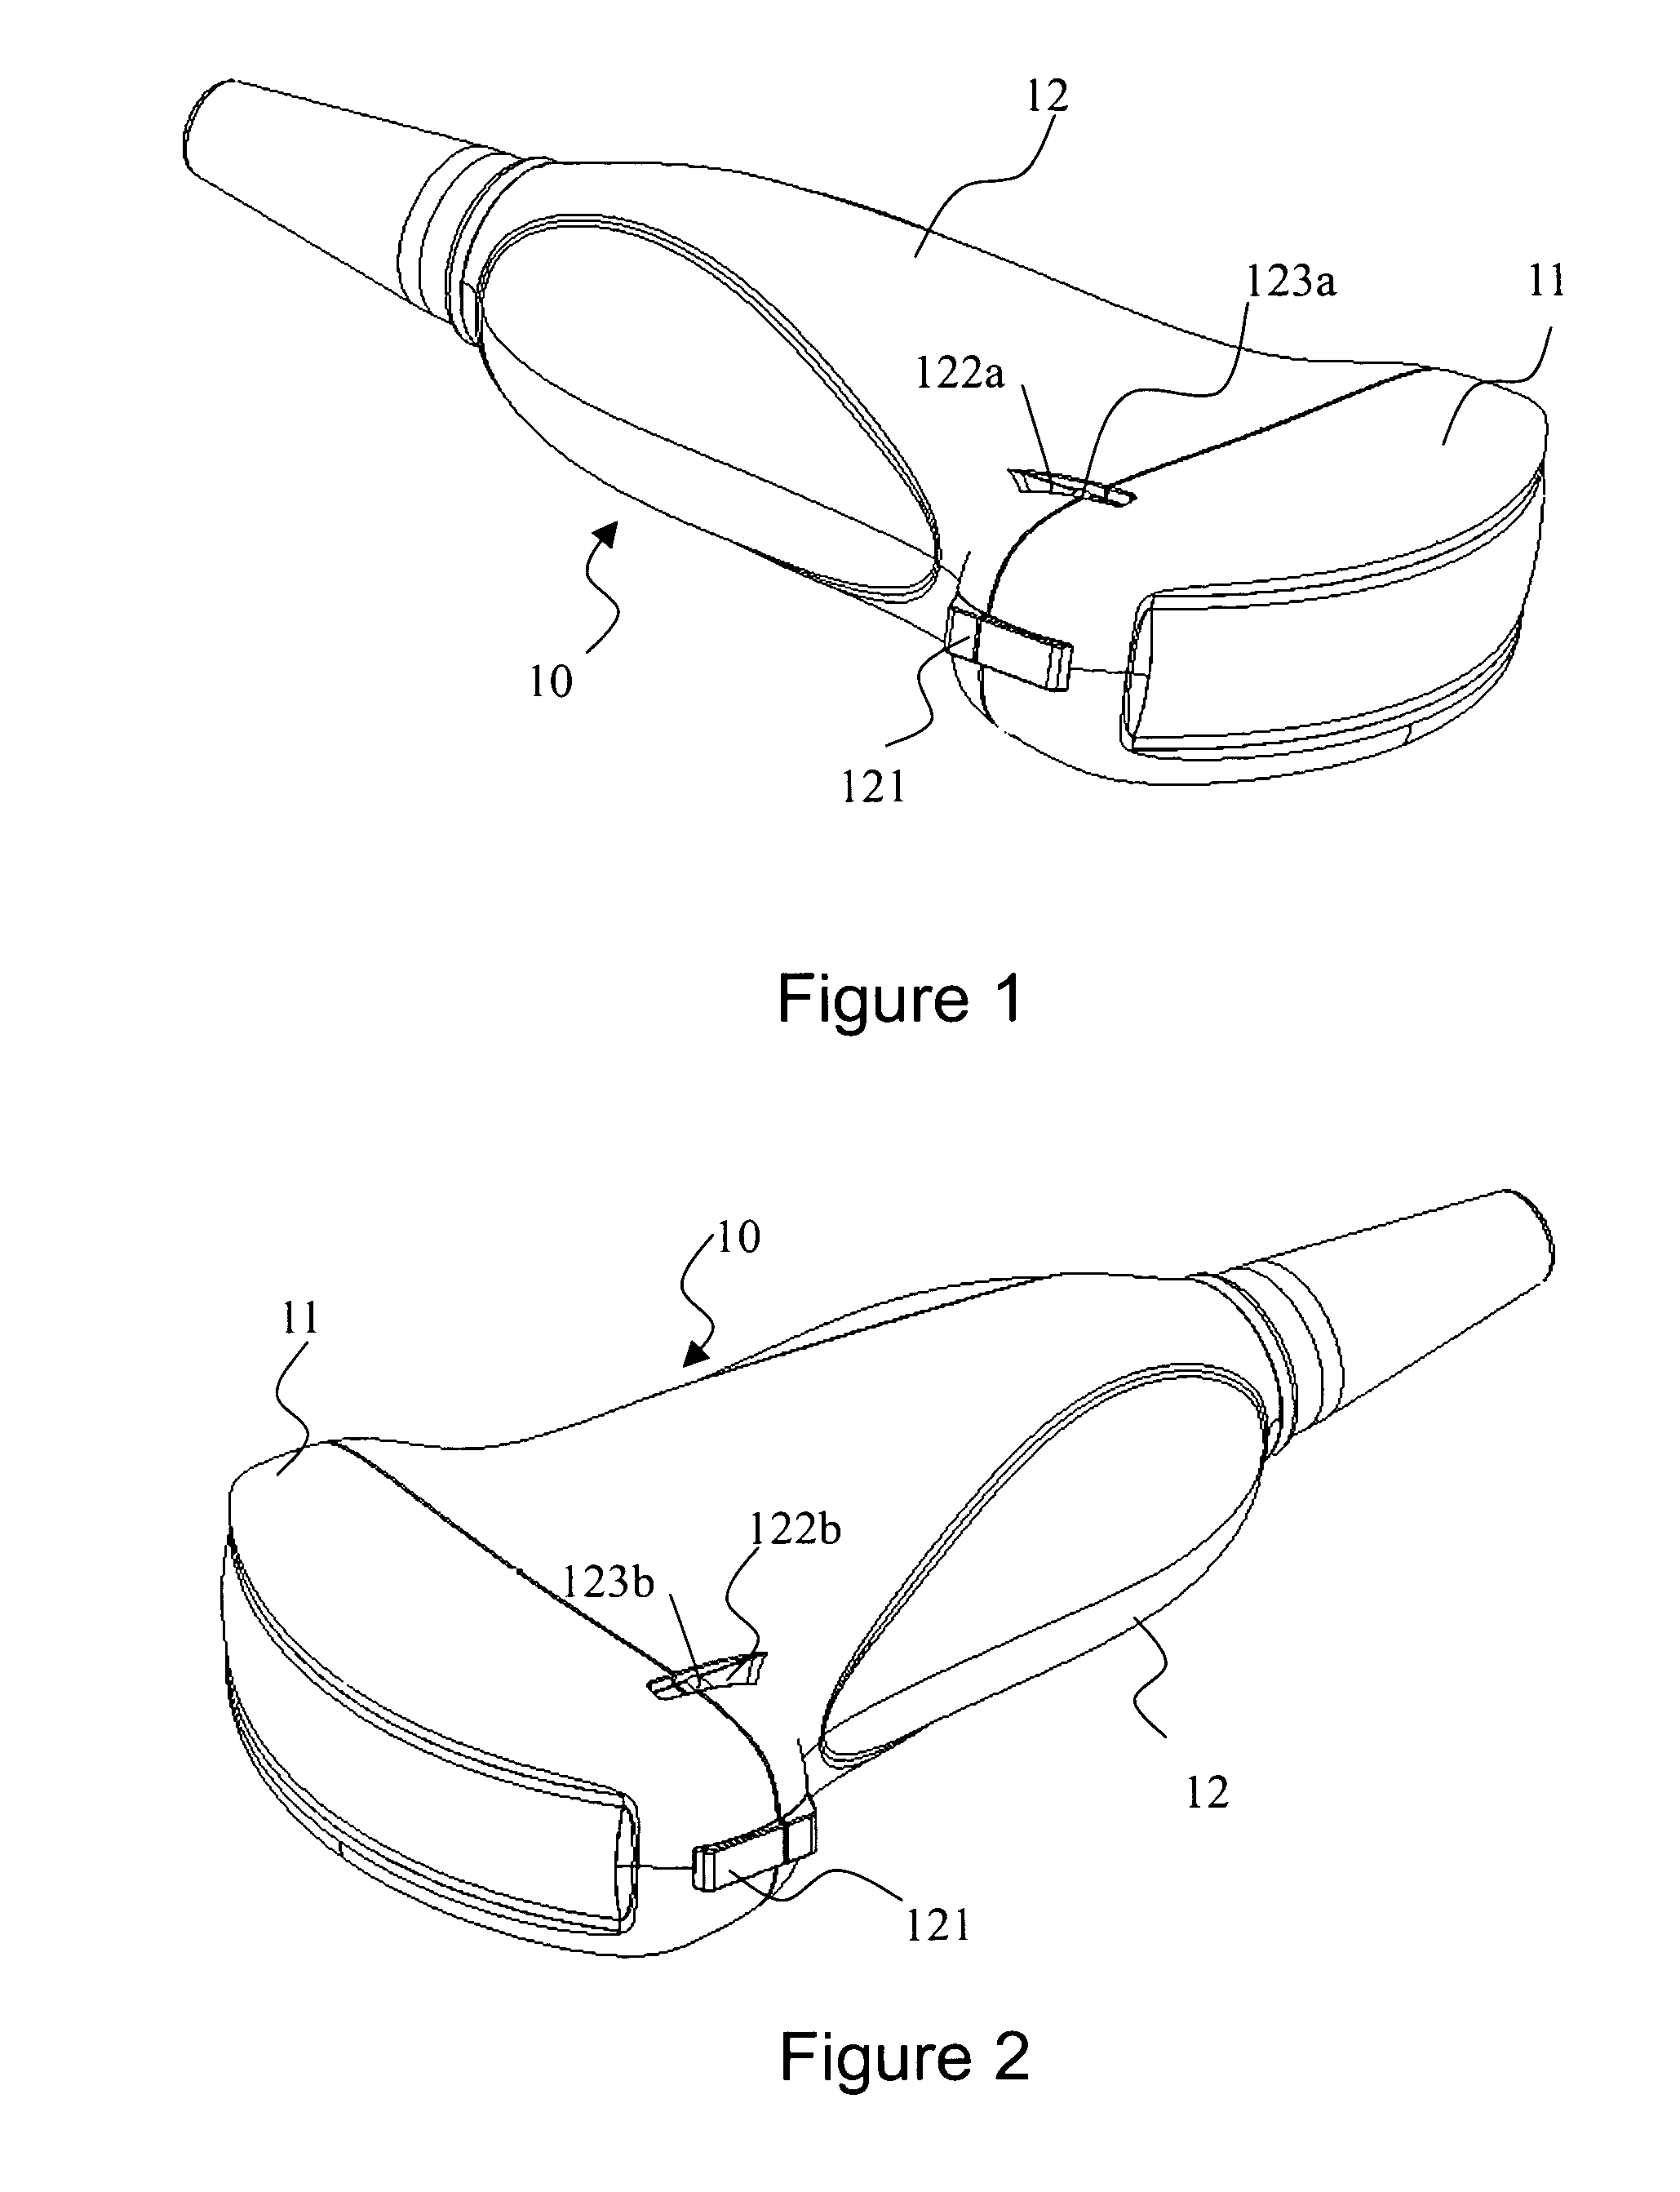 Structure for attaching needle guide to ultrasound probe